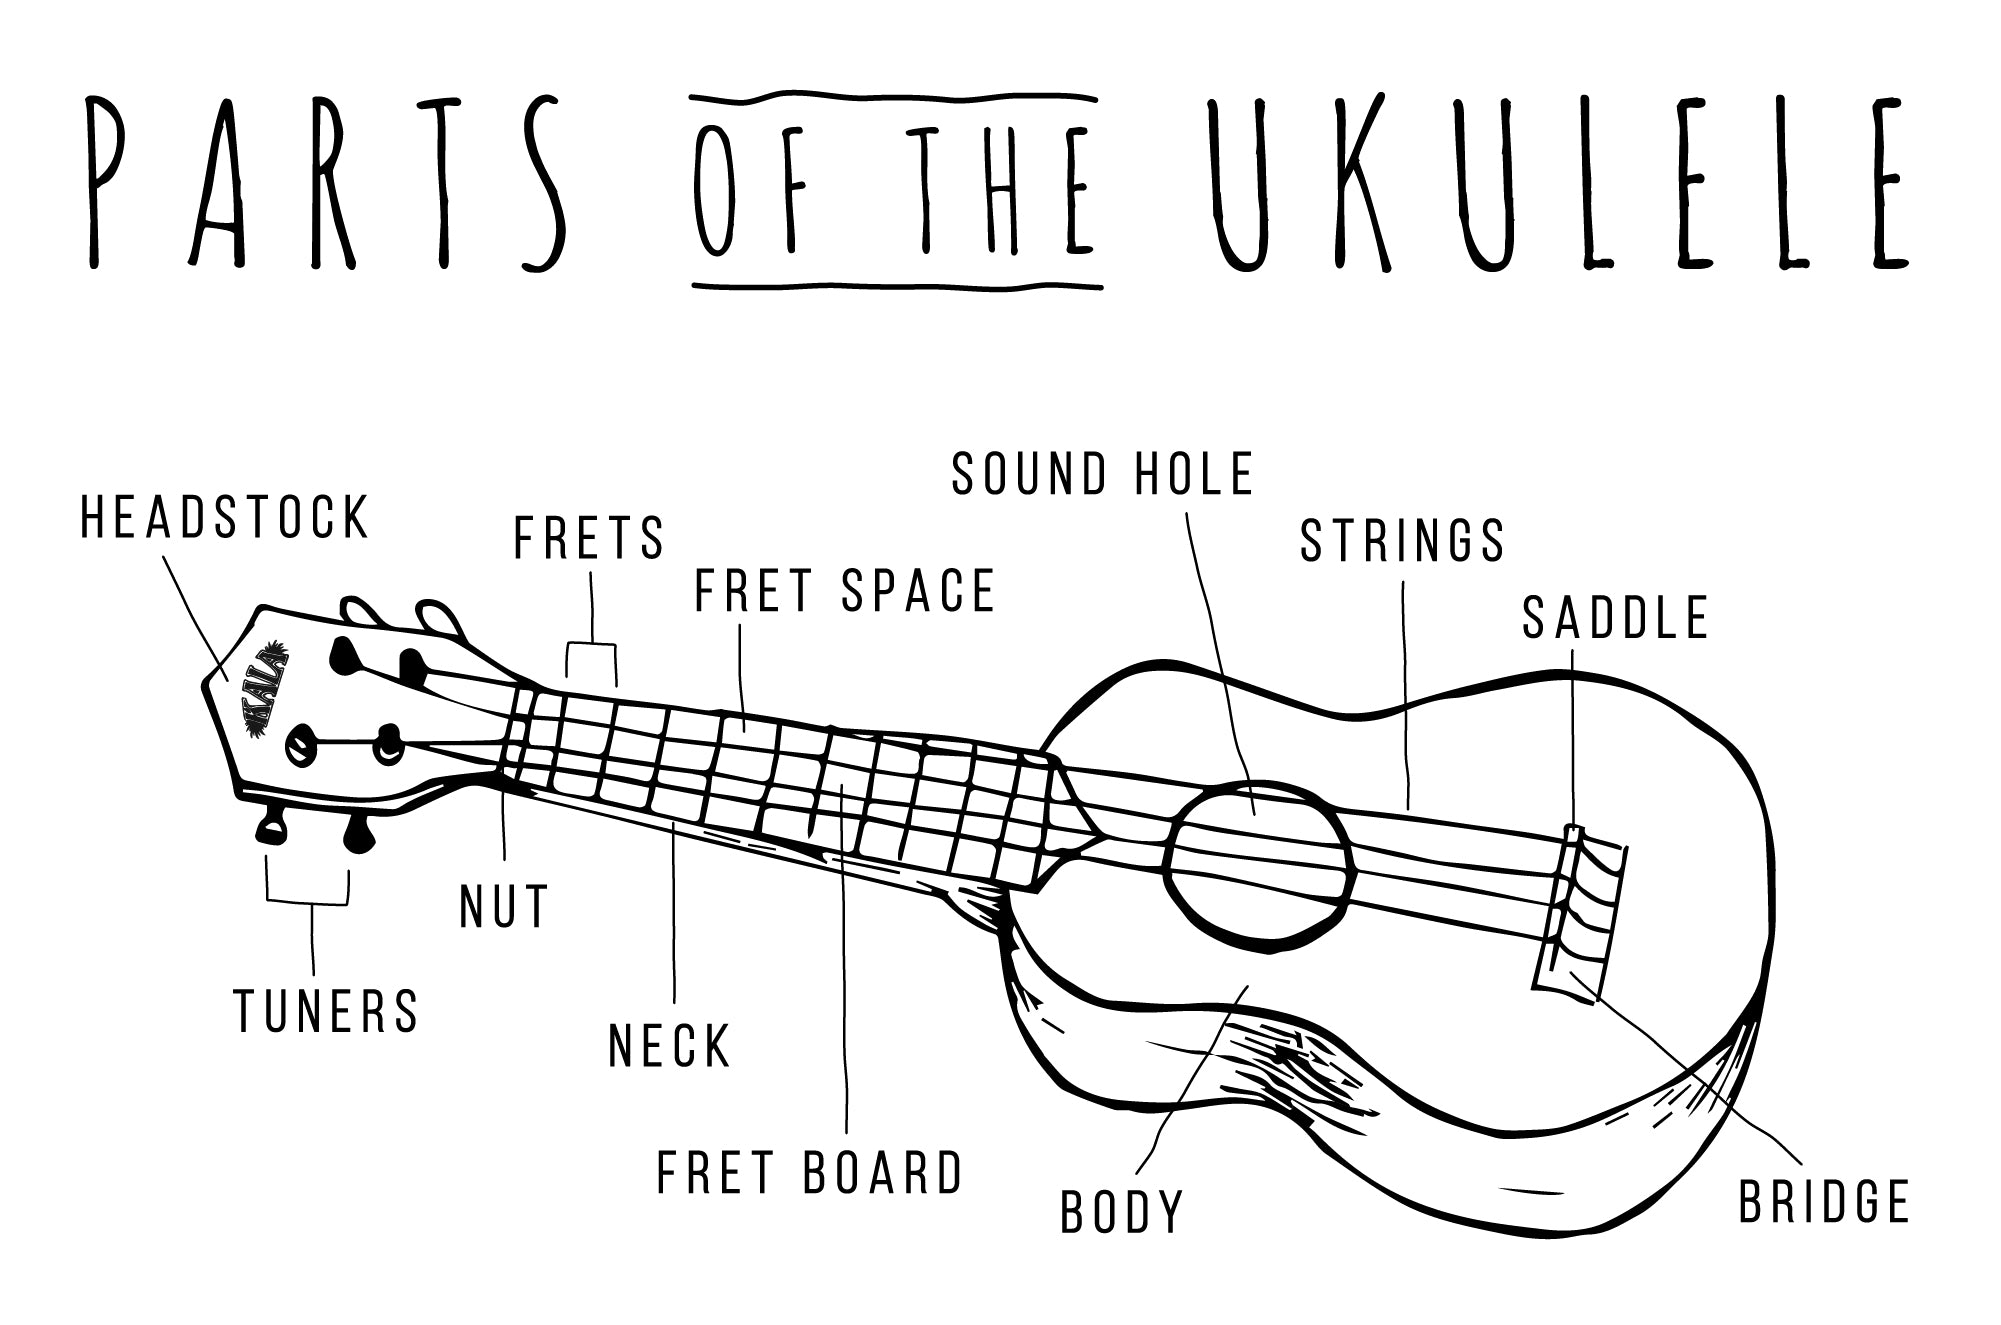 Drawn diagram of an ukulele with parts labeled including headstock, tuners, nut, neck, frets, fretboard, fret space, body, sound hole, saddle, bridge, and strings.